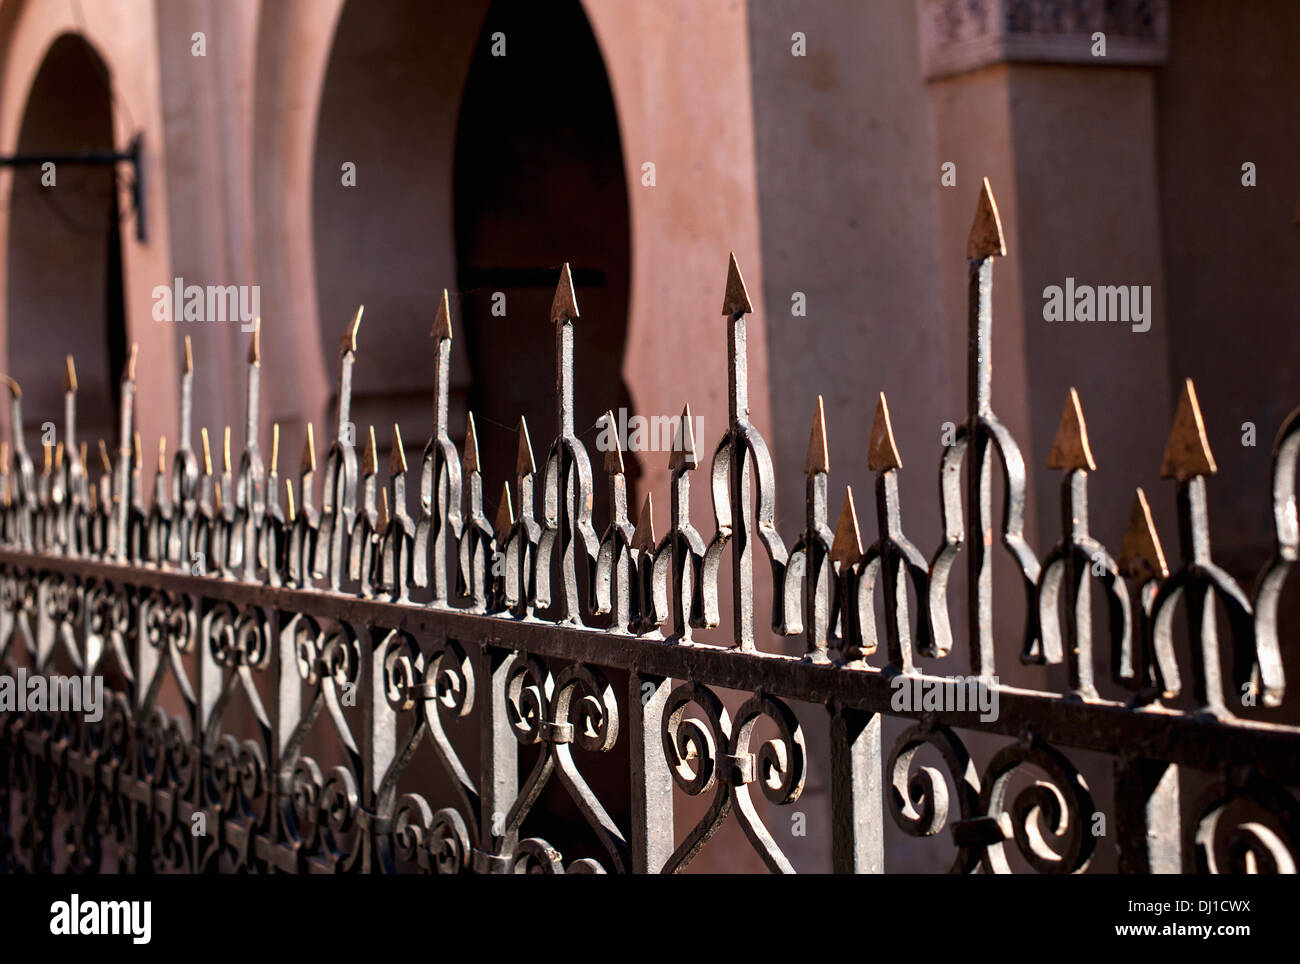 A Metal Railing With Sharp Pointed Edges On Top And A Building With Arched Doorways Stock Photo